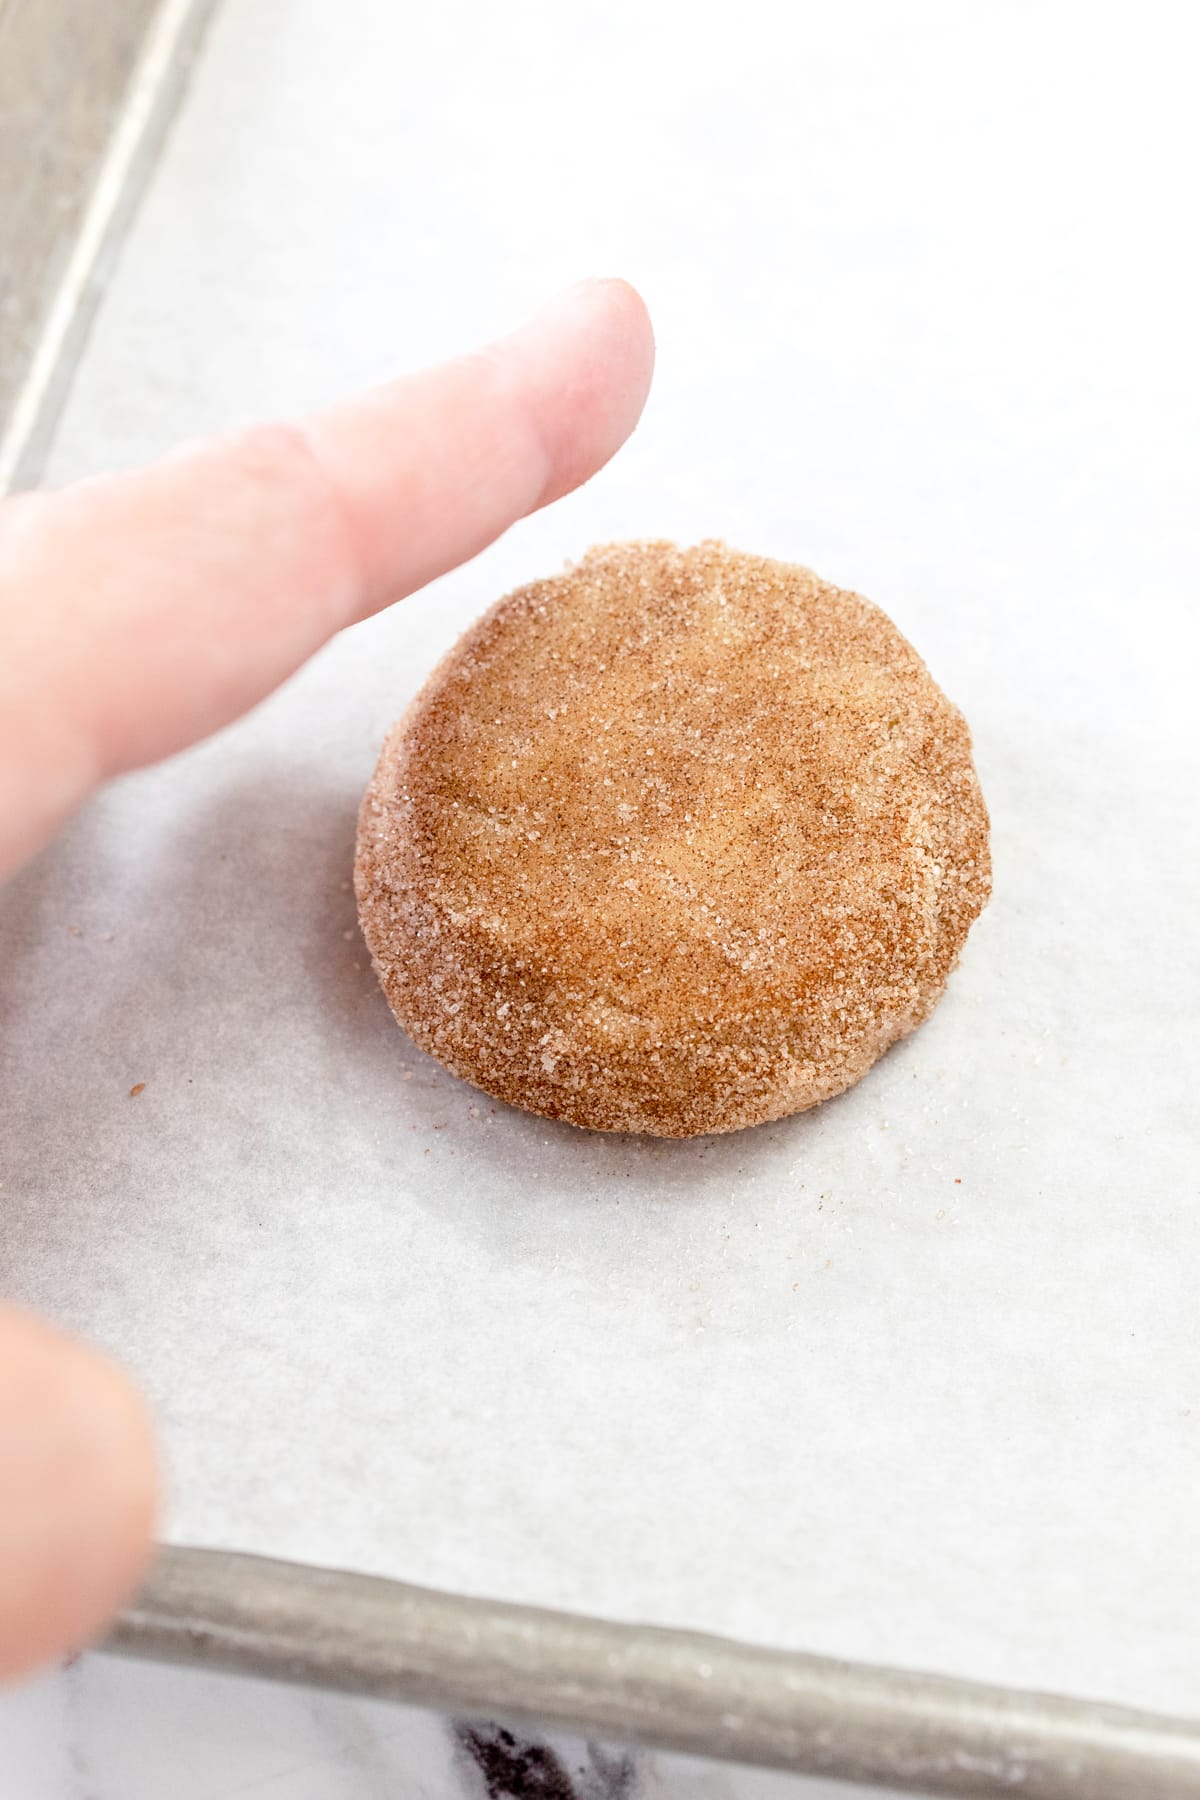 Cinnamon Churro Cookie dough ball about to be flattened with someone's finger.